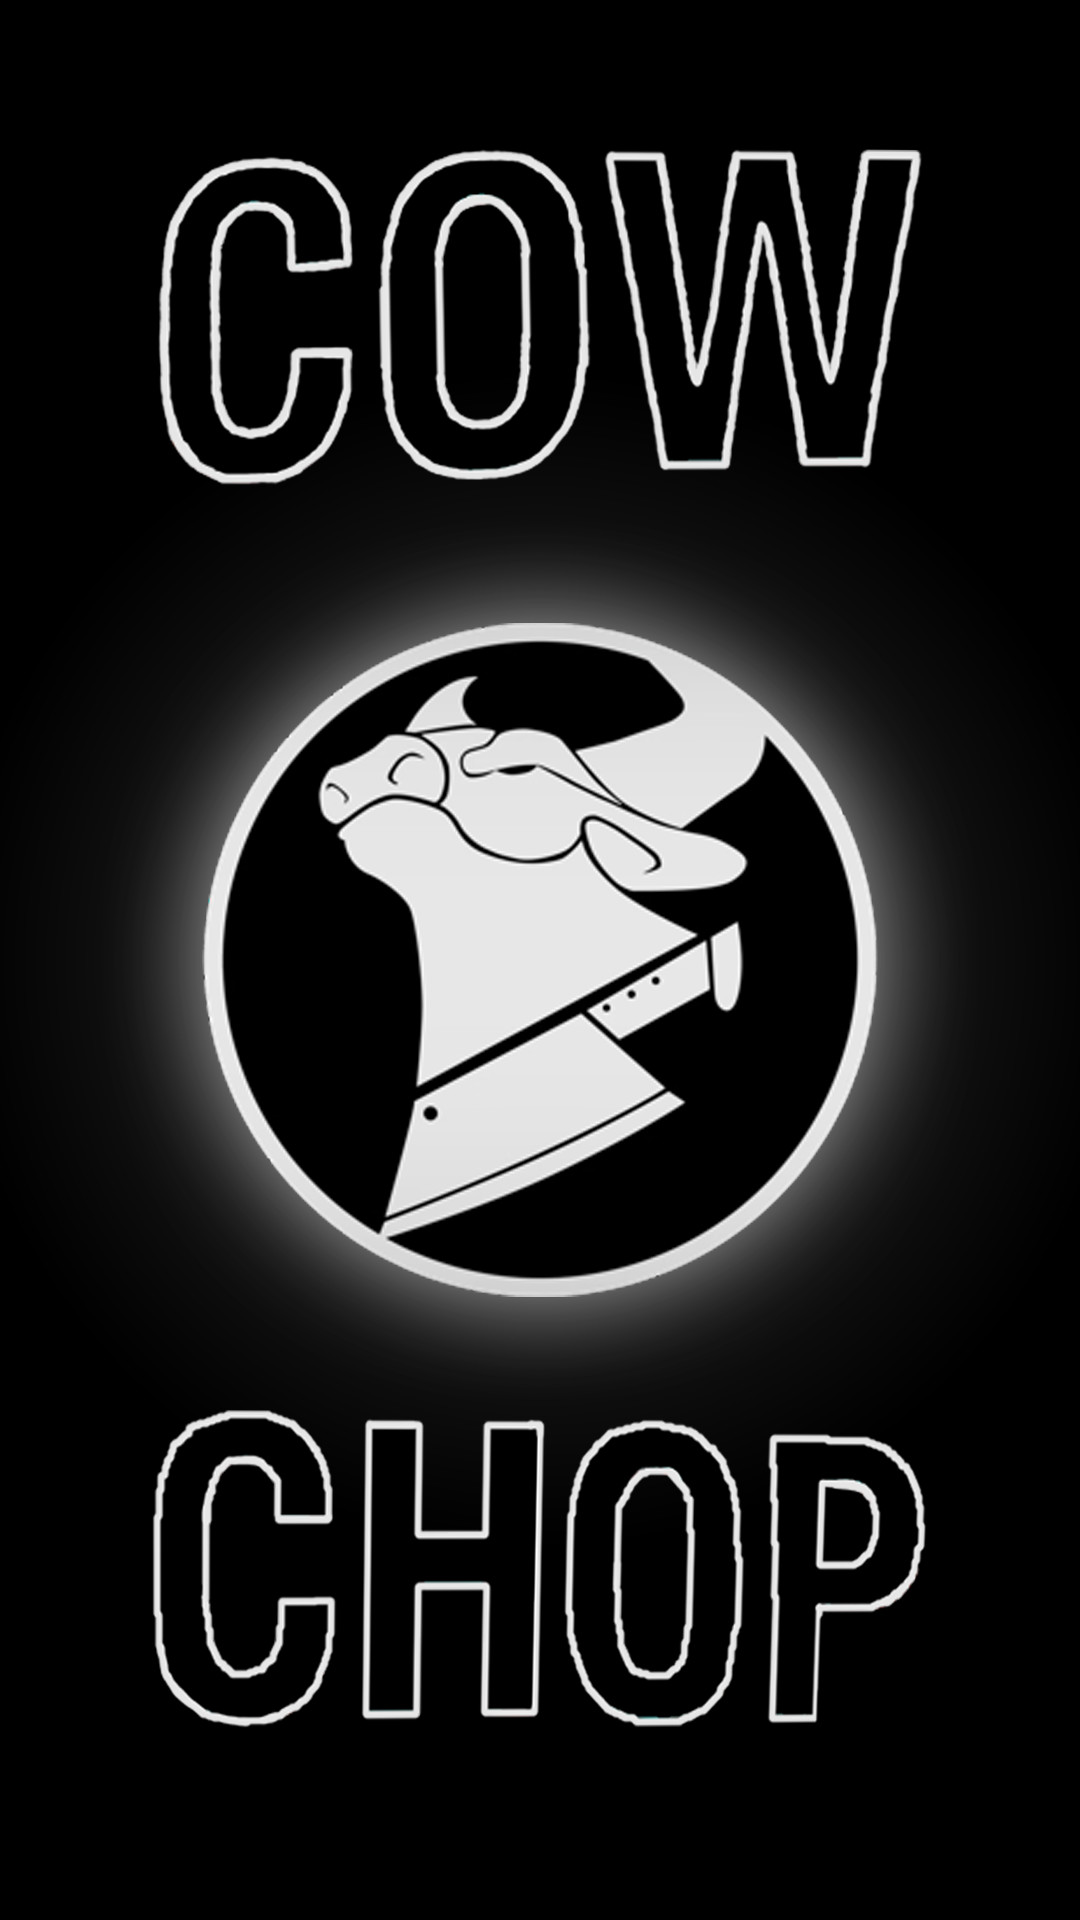 1080x1920 WallpaperWant to spice up your mobile wallpaper? Use this Cow Chop wallpaper !